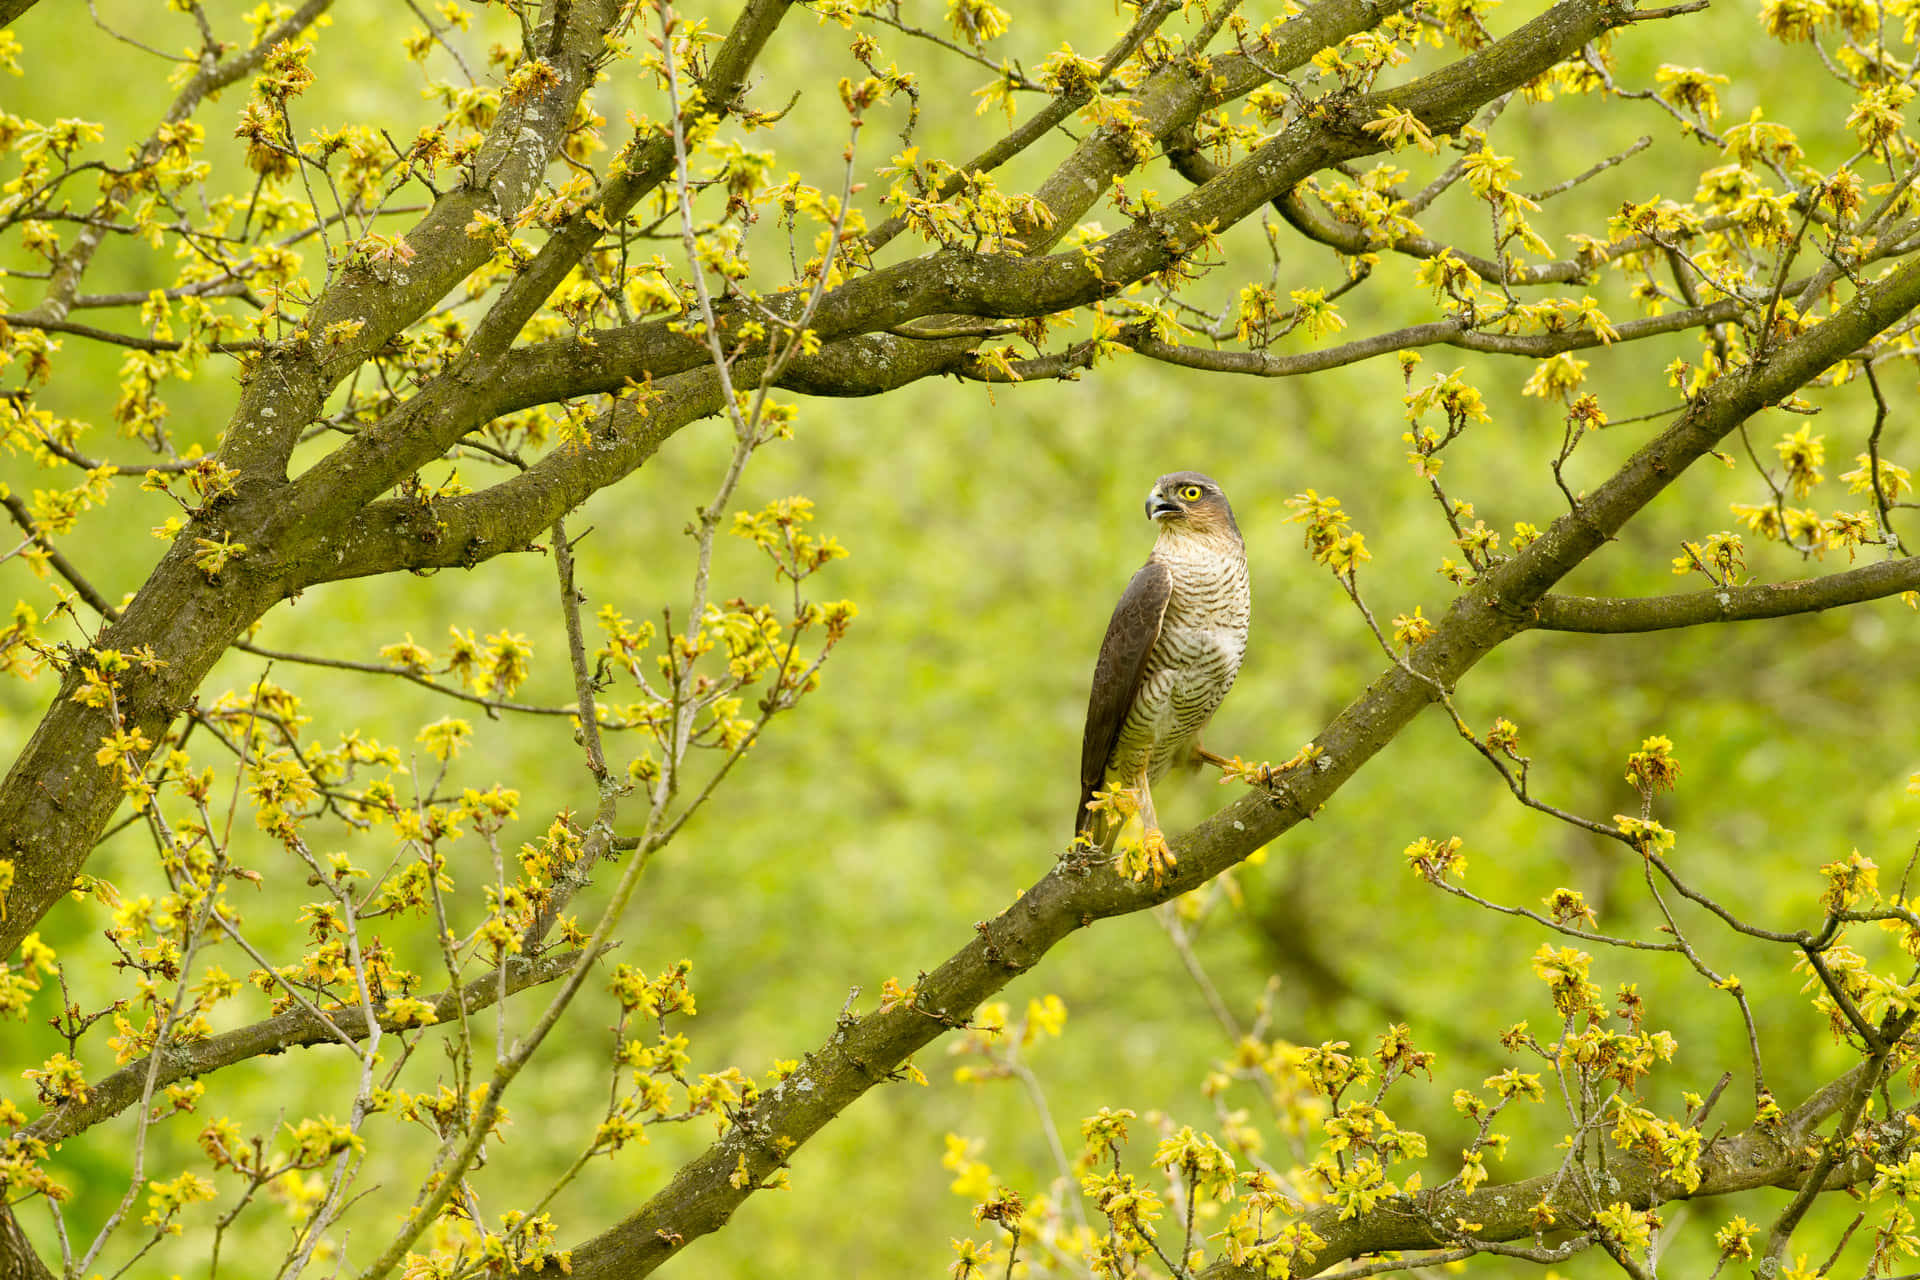 A Hawk Perched On A Branch With Yellow Flowers